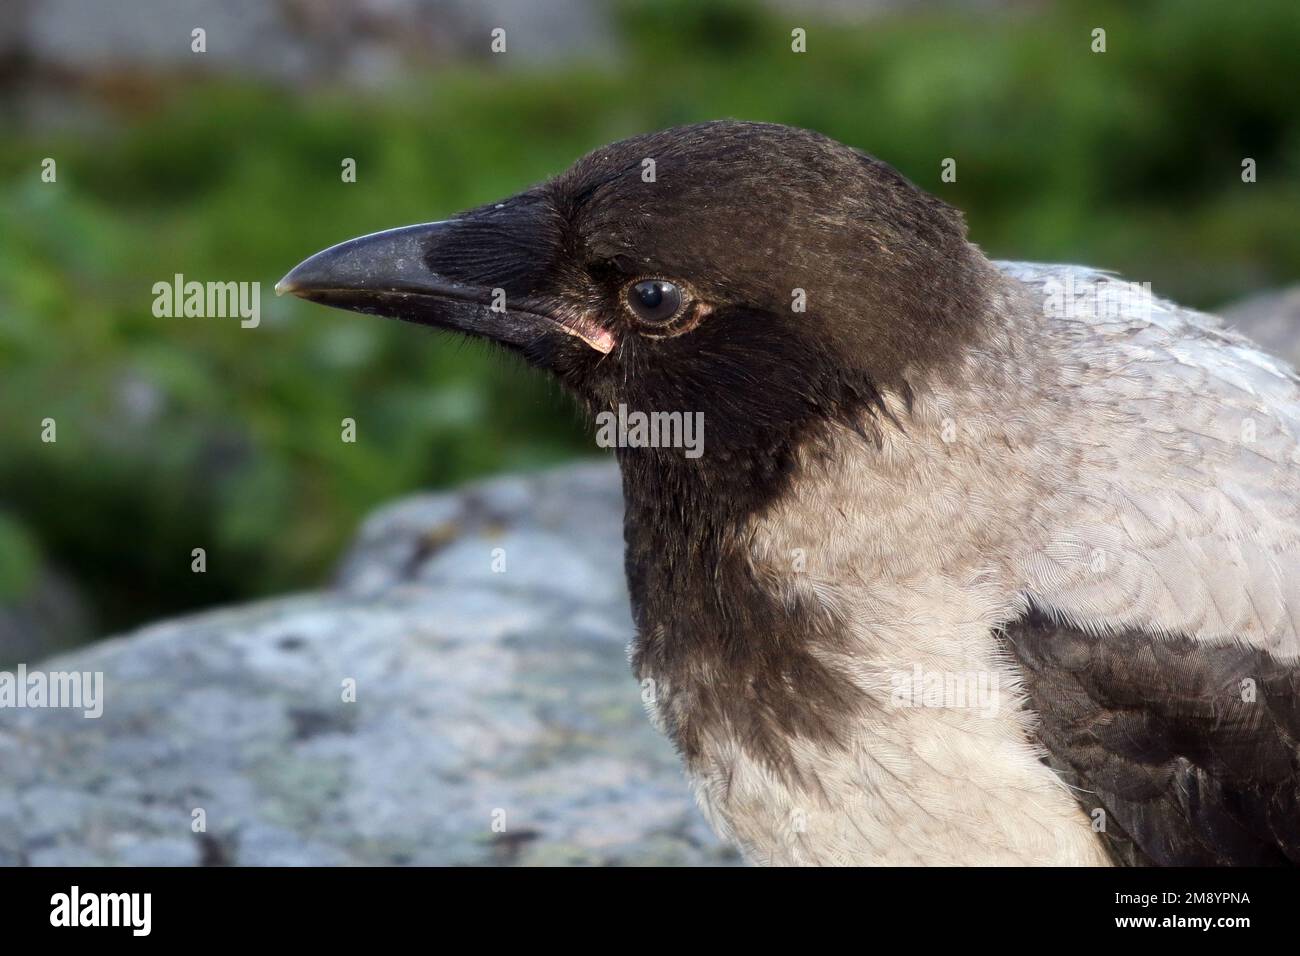 Portrait of juvenile Hooded Crow, Corvus cornix. The young bird has blue-grey eyes, flatter forehead, and red on the base of the bill. Stock Photo